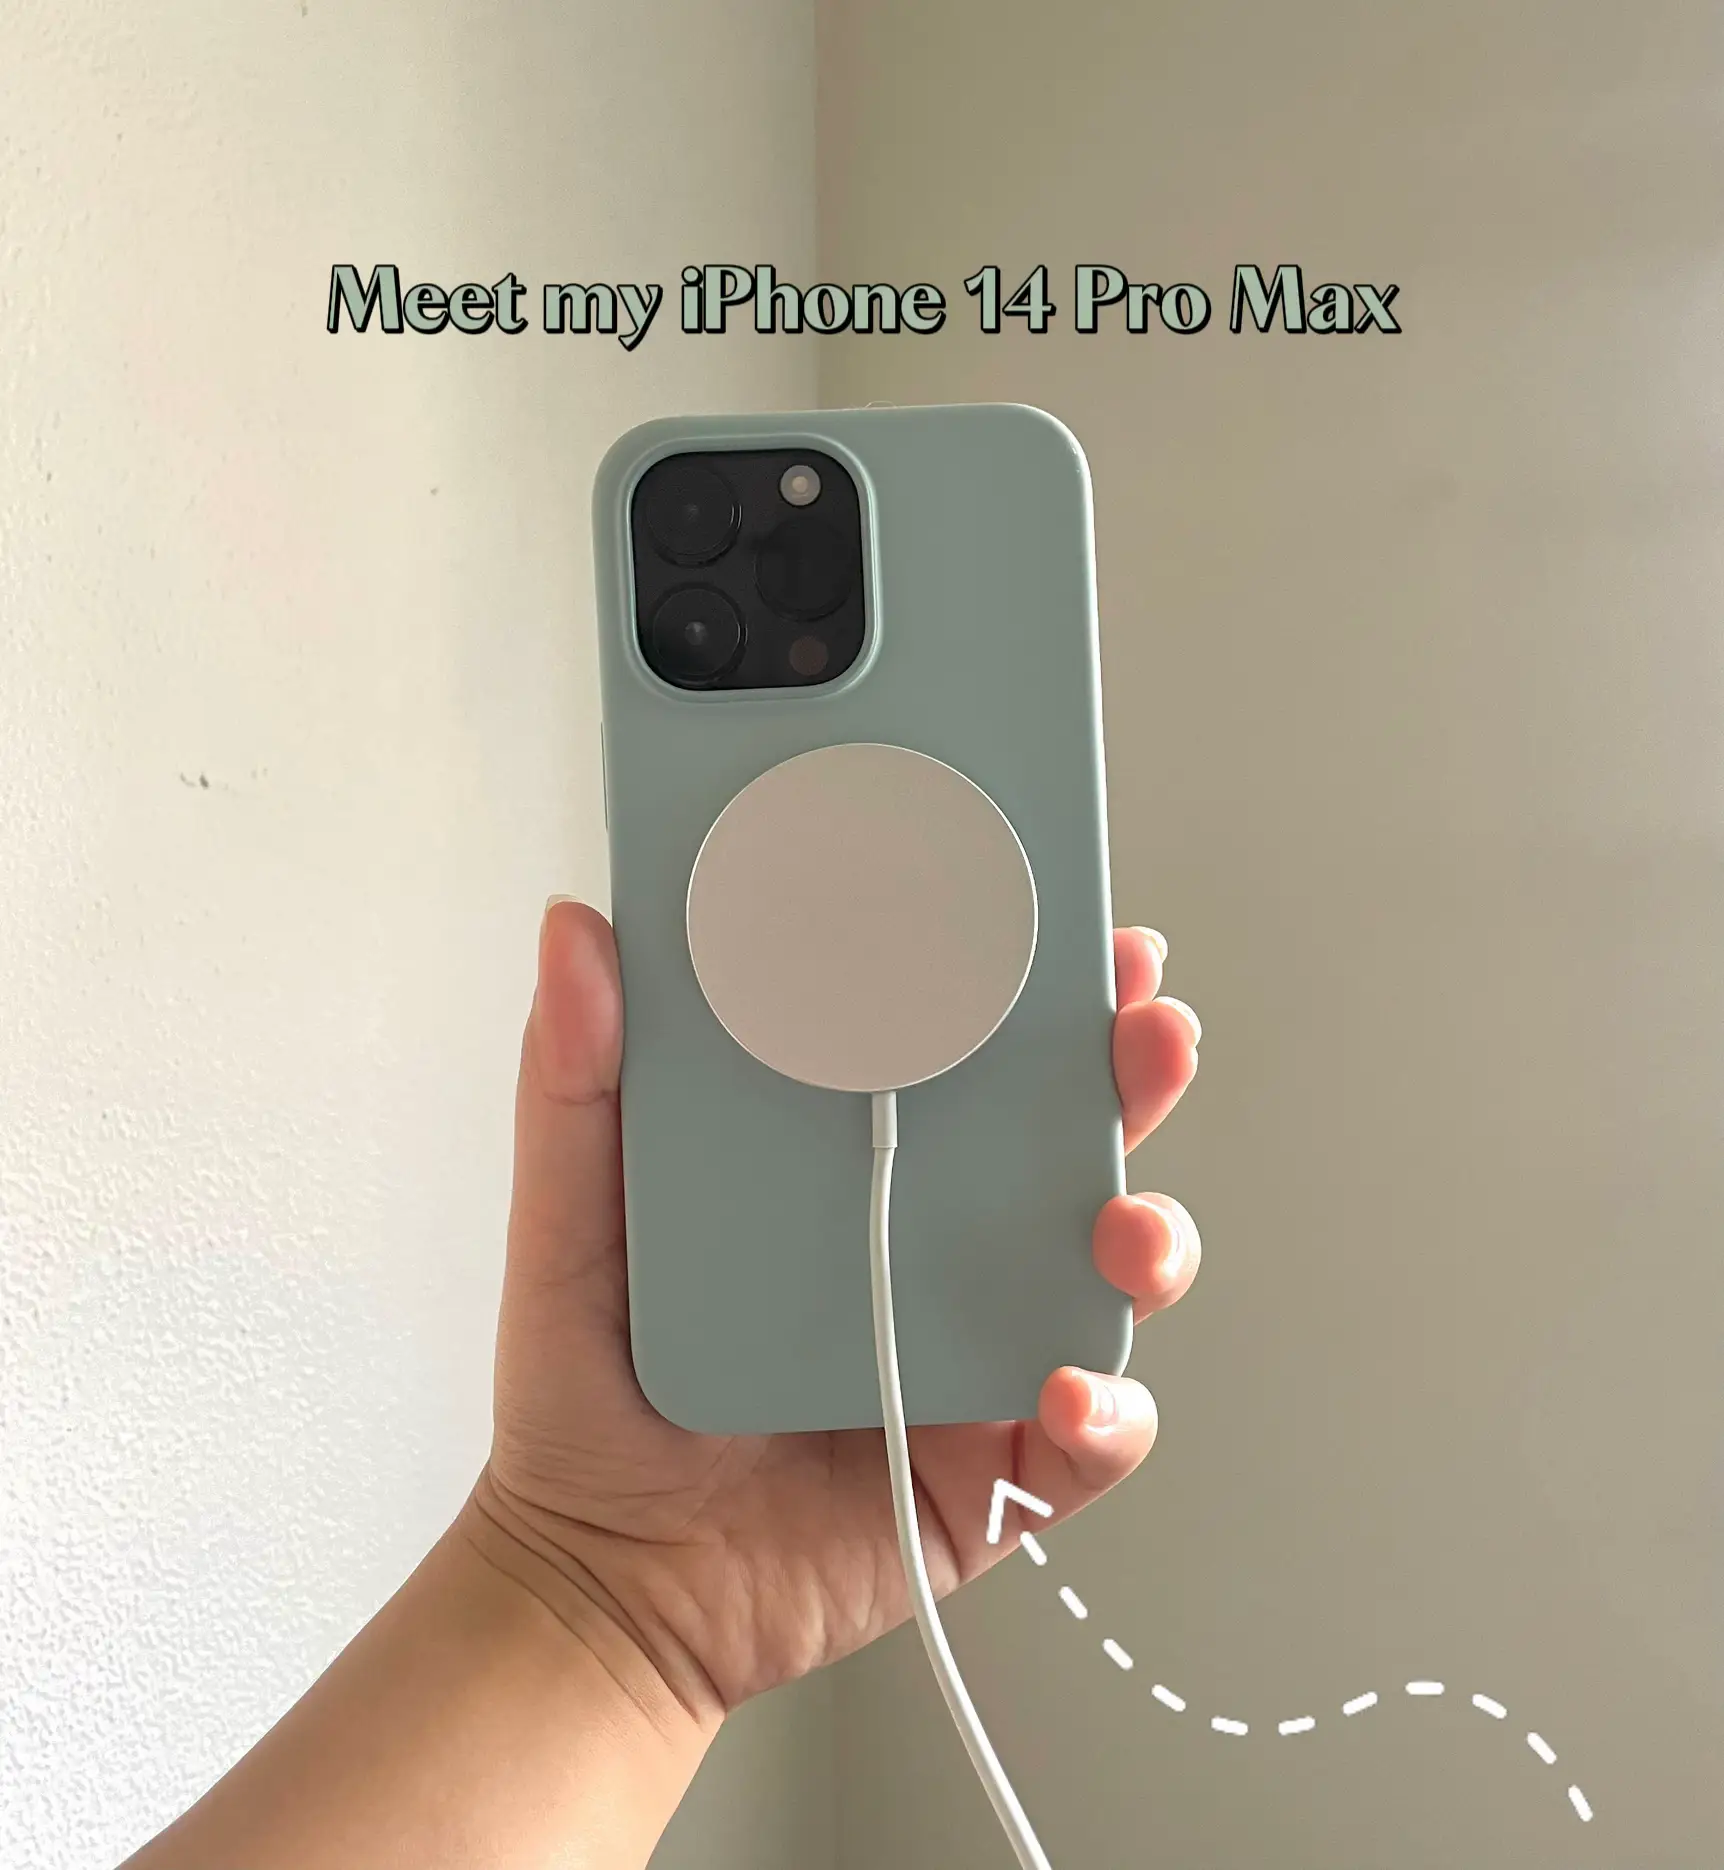 Casetify iPhone 14 Pro Cases *unboxing* 